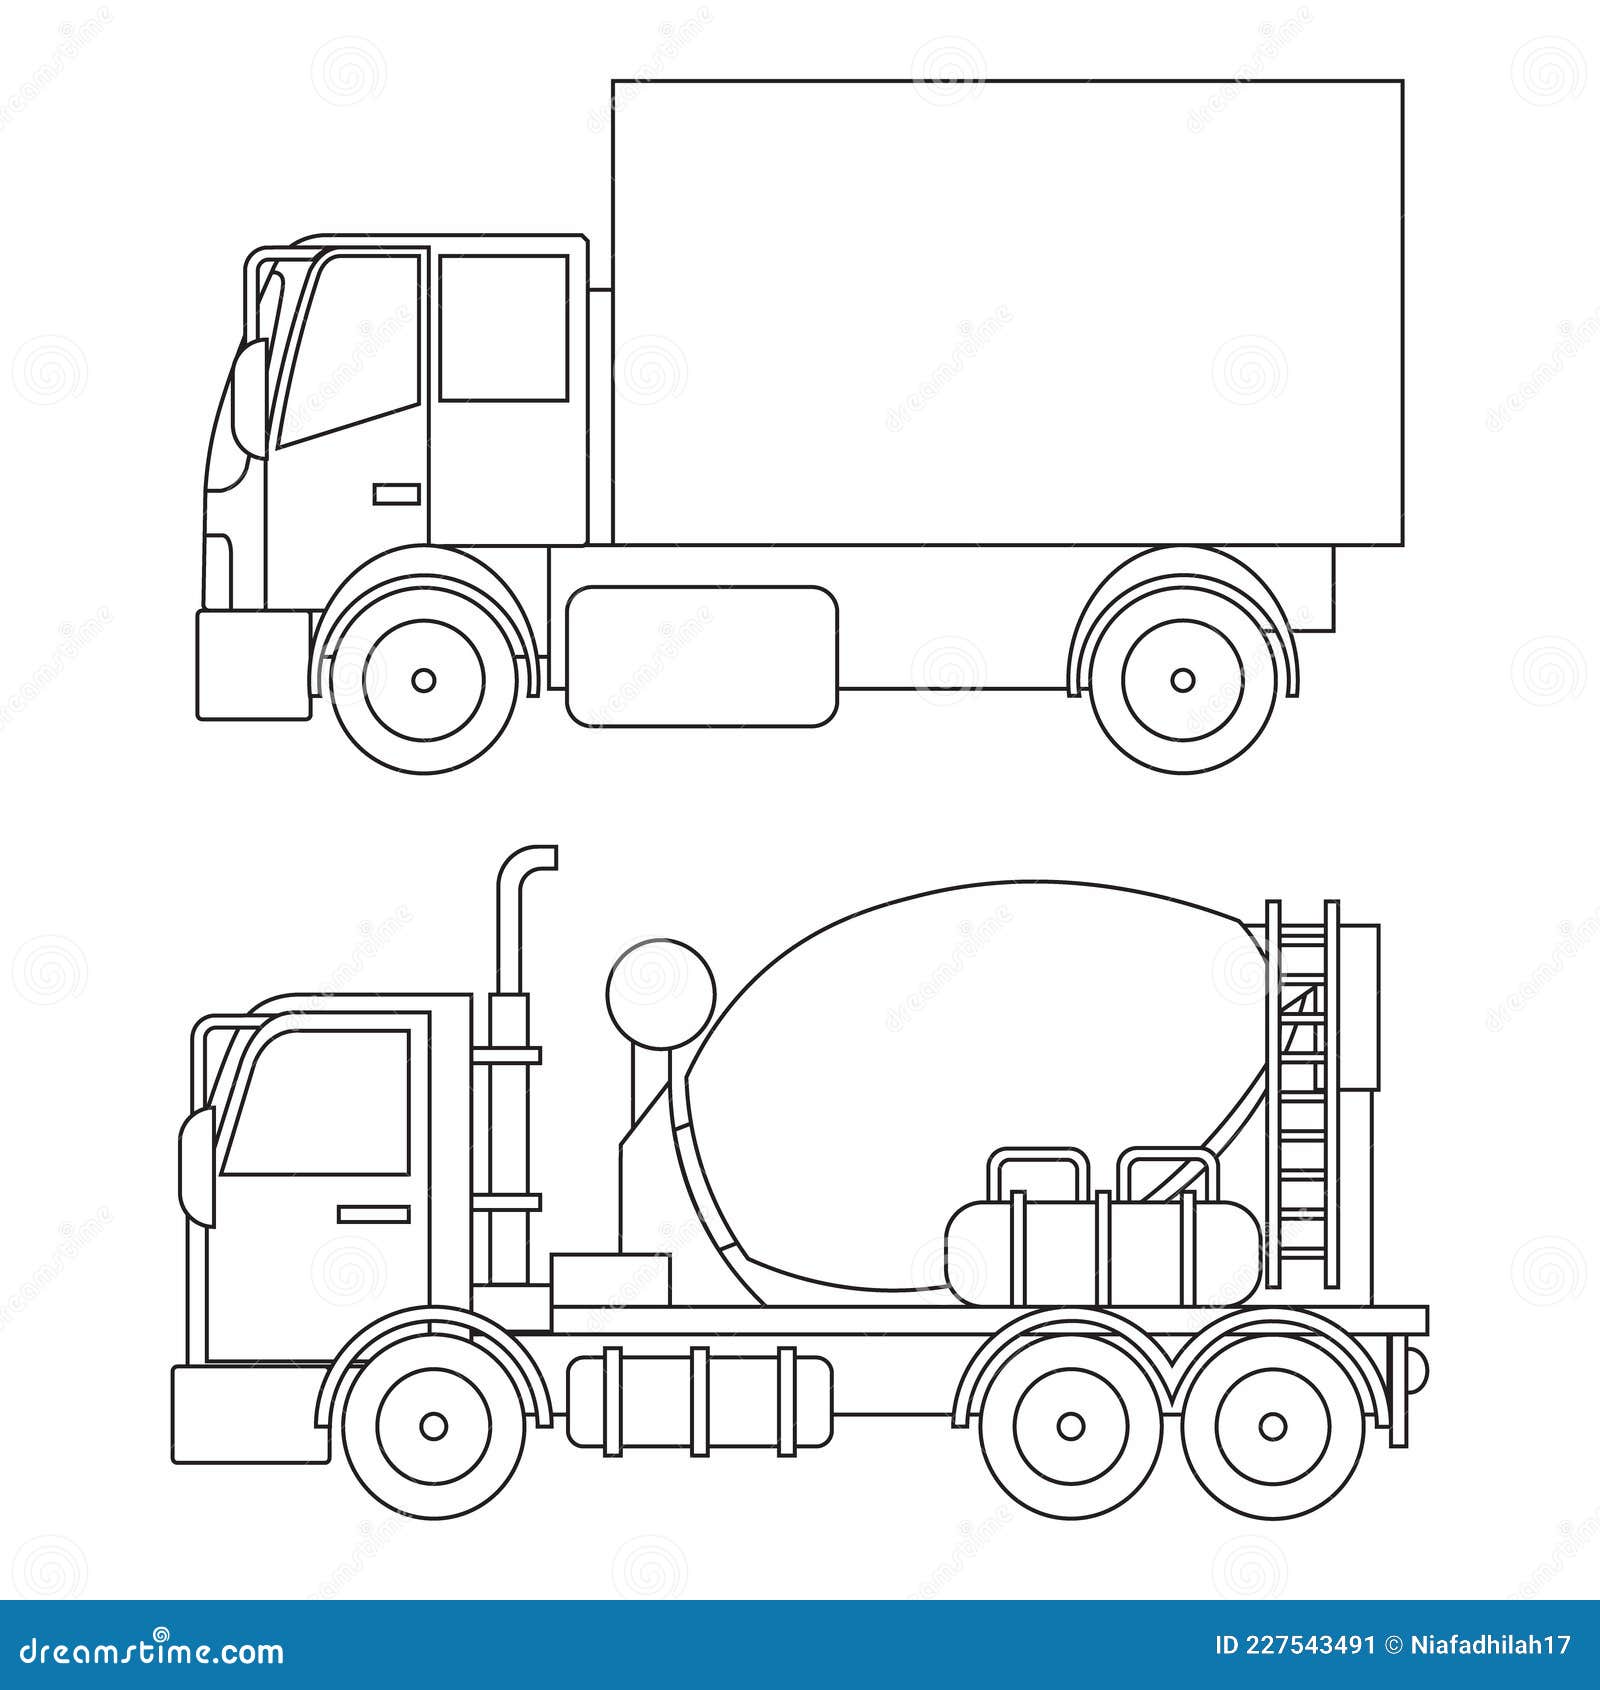 How to draw a mixing truck very easy learn drawing step by step with draw  easy - YouTube